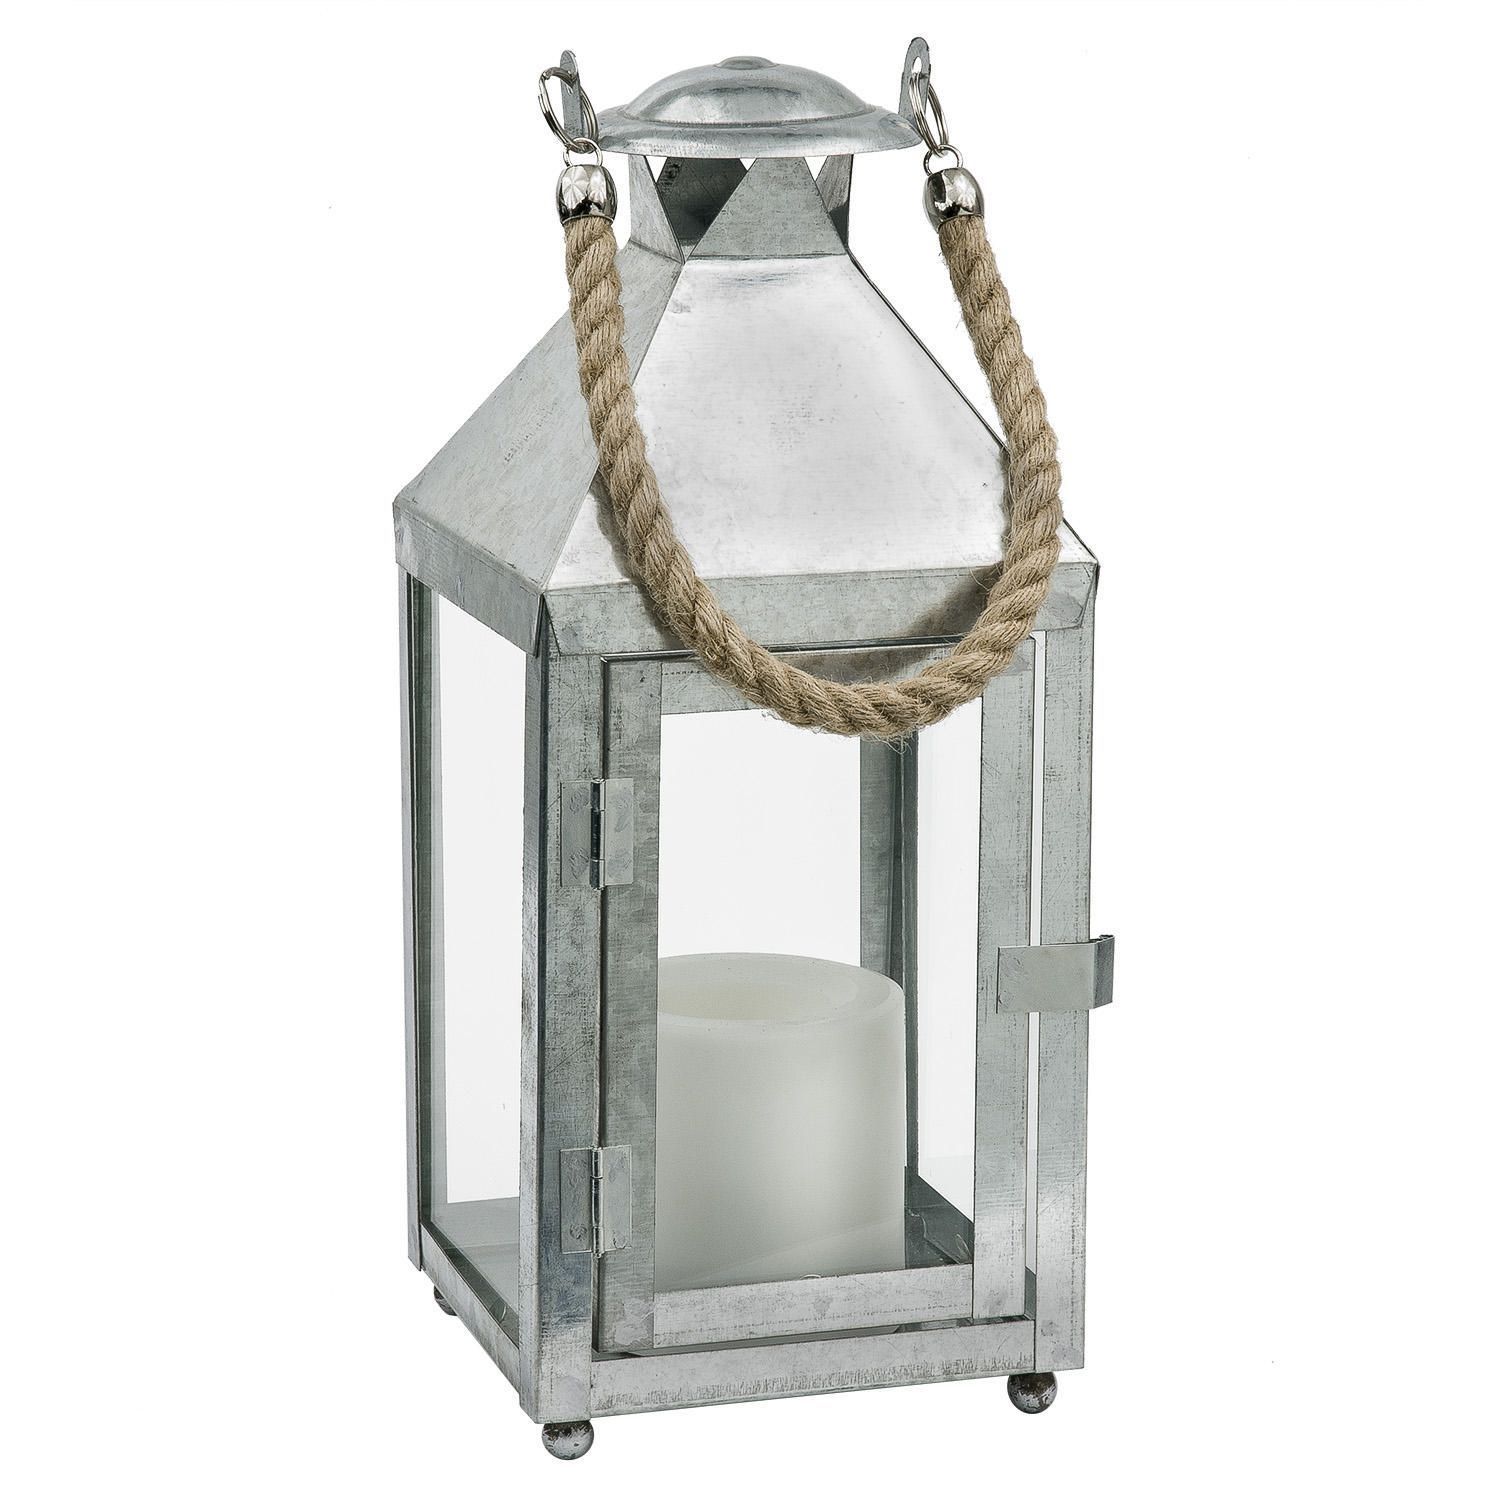 Paradise Gl28672mgv Metal Lantern And Flameless Outdoor Candle Within Walmart Outdoor Lanterns (View 12 of 20)